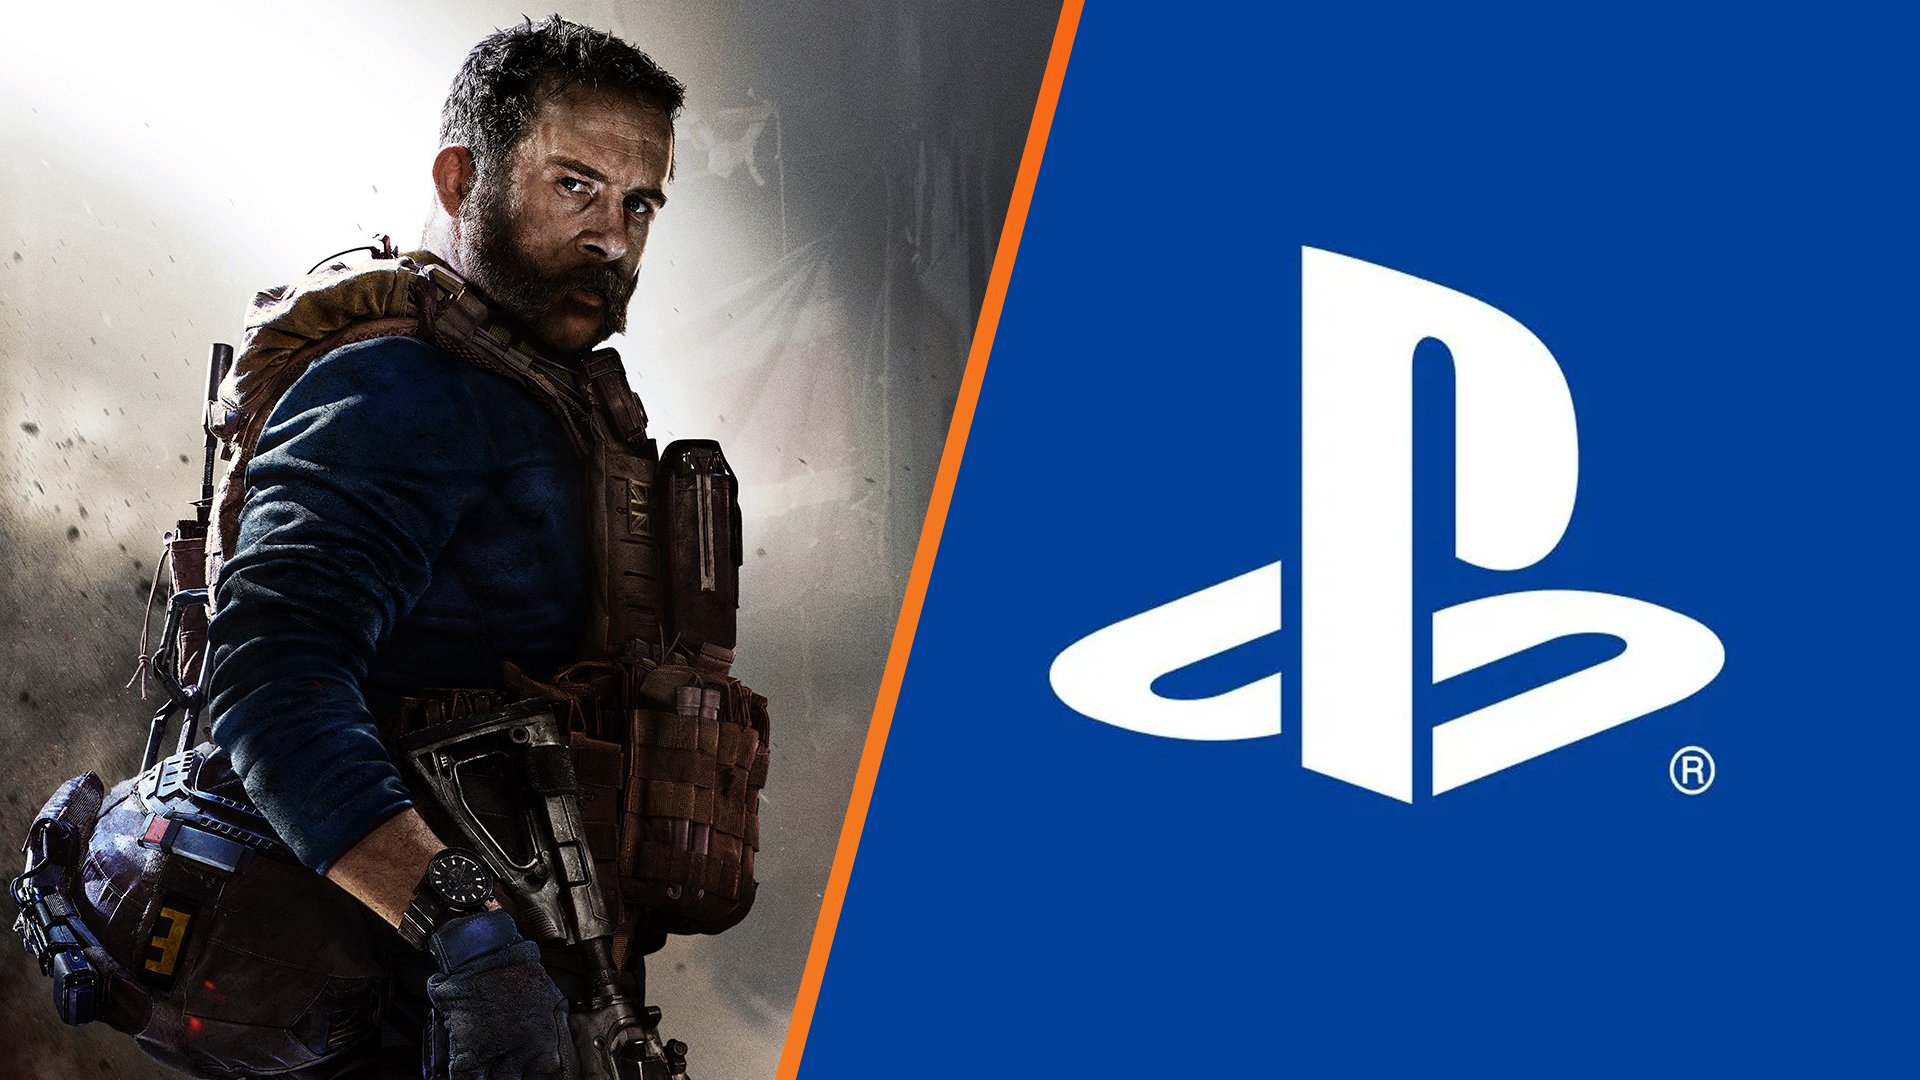 When will Call of Duty arrive on Xbox Game Pass? Document gives